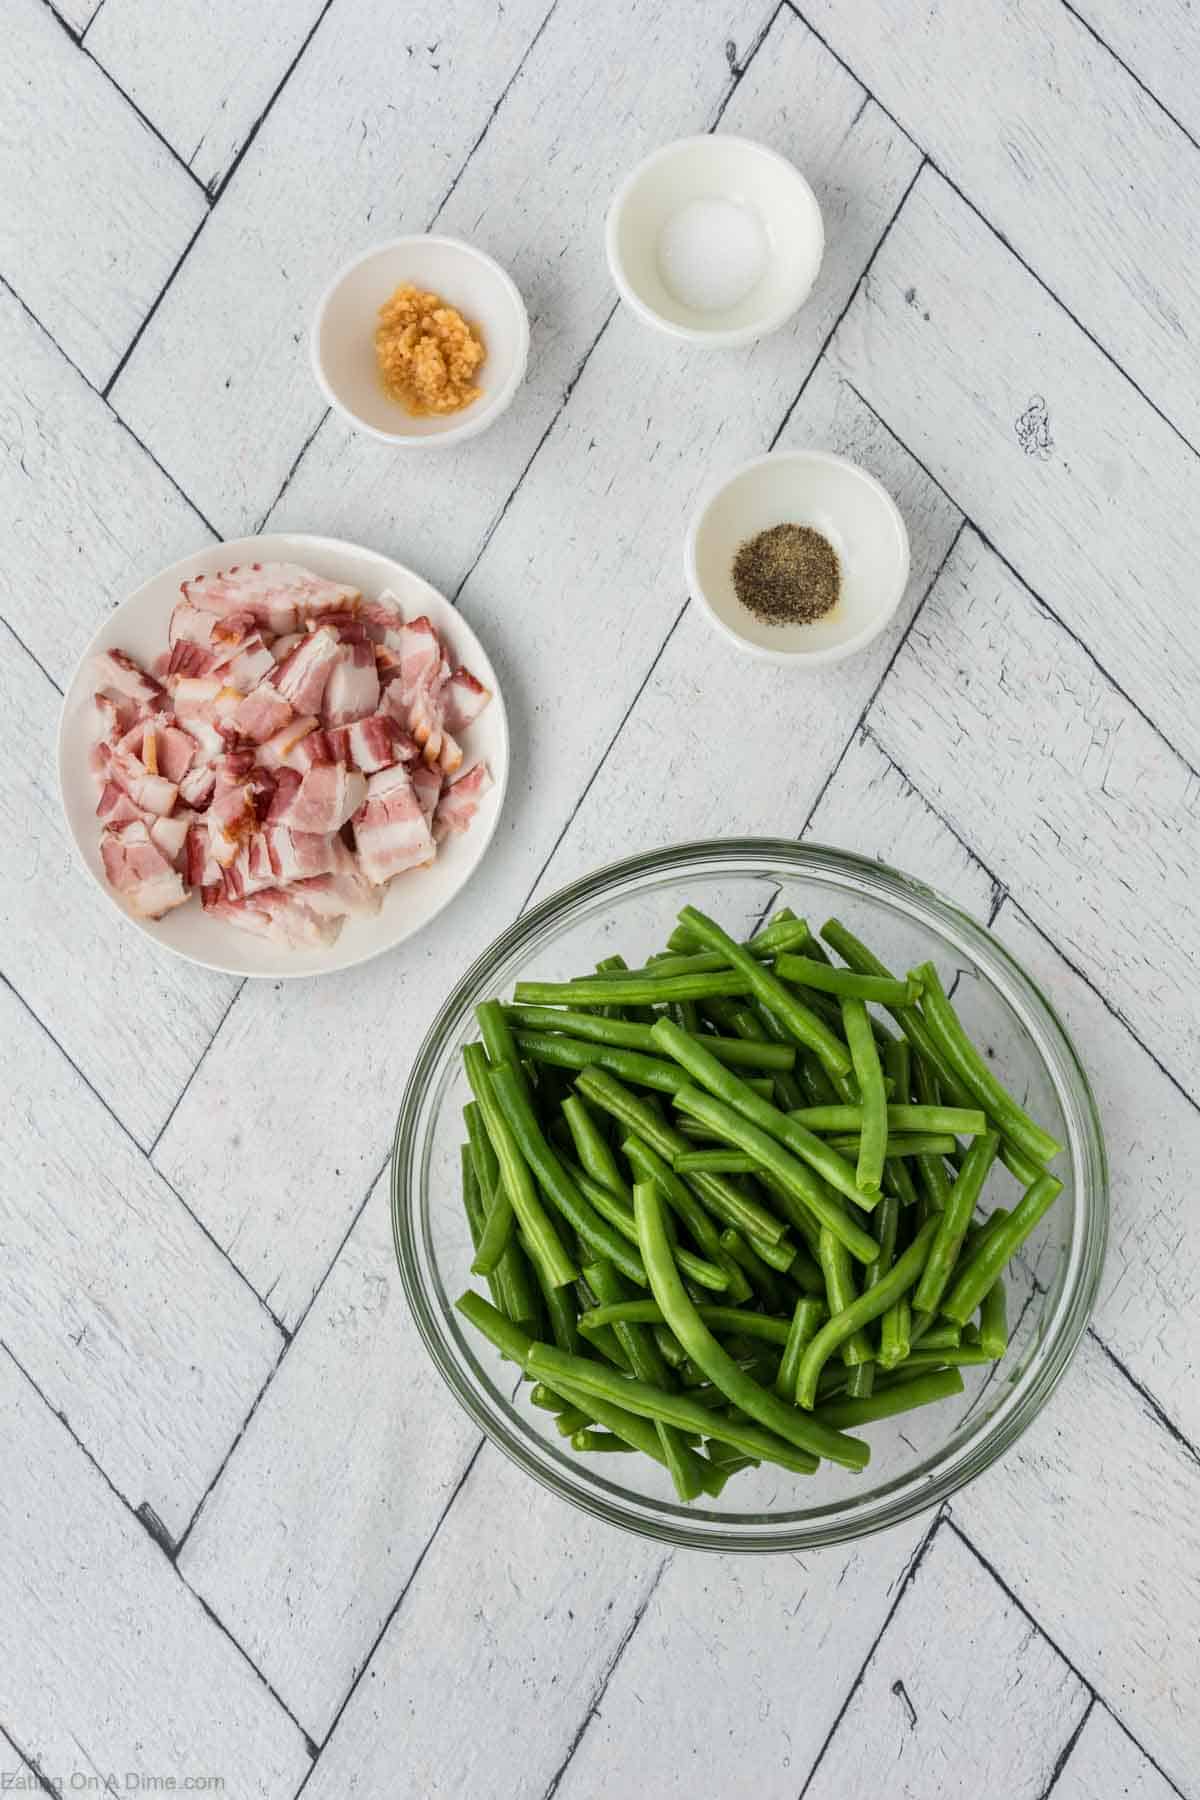 Ingredients needed - minced garlic, salt, pepper, chopped bacon and fresh green beans